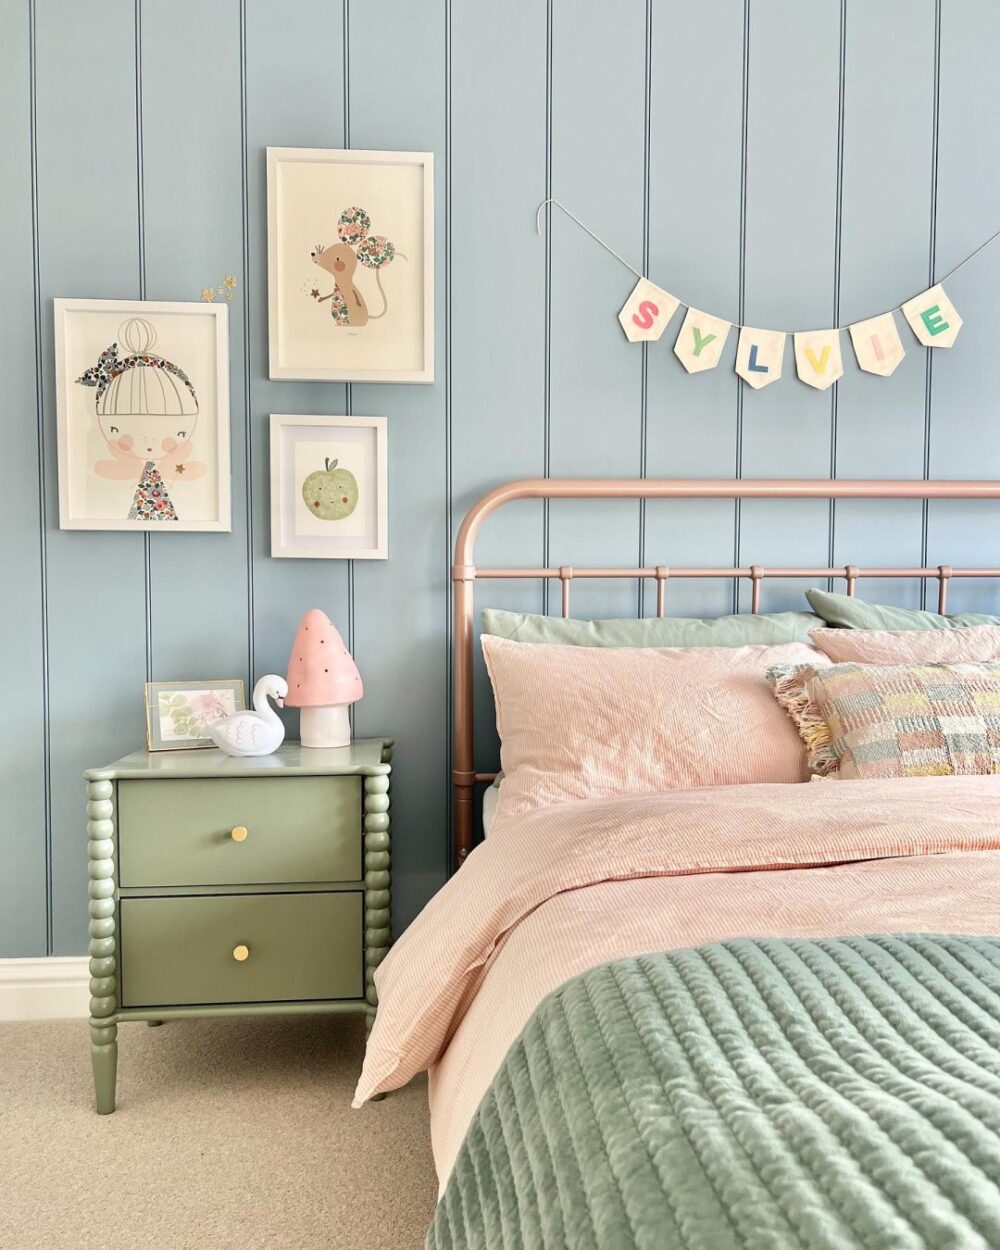 Pink bed frame with light green bedding